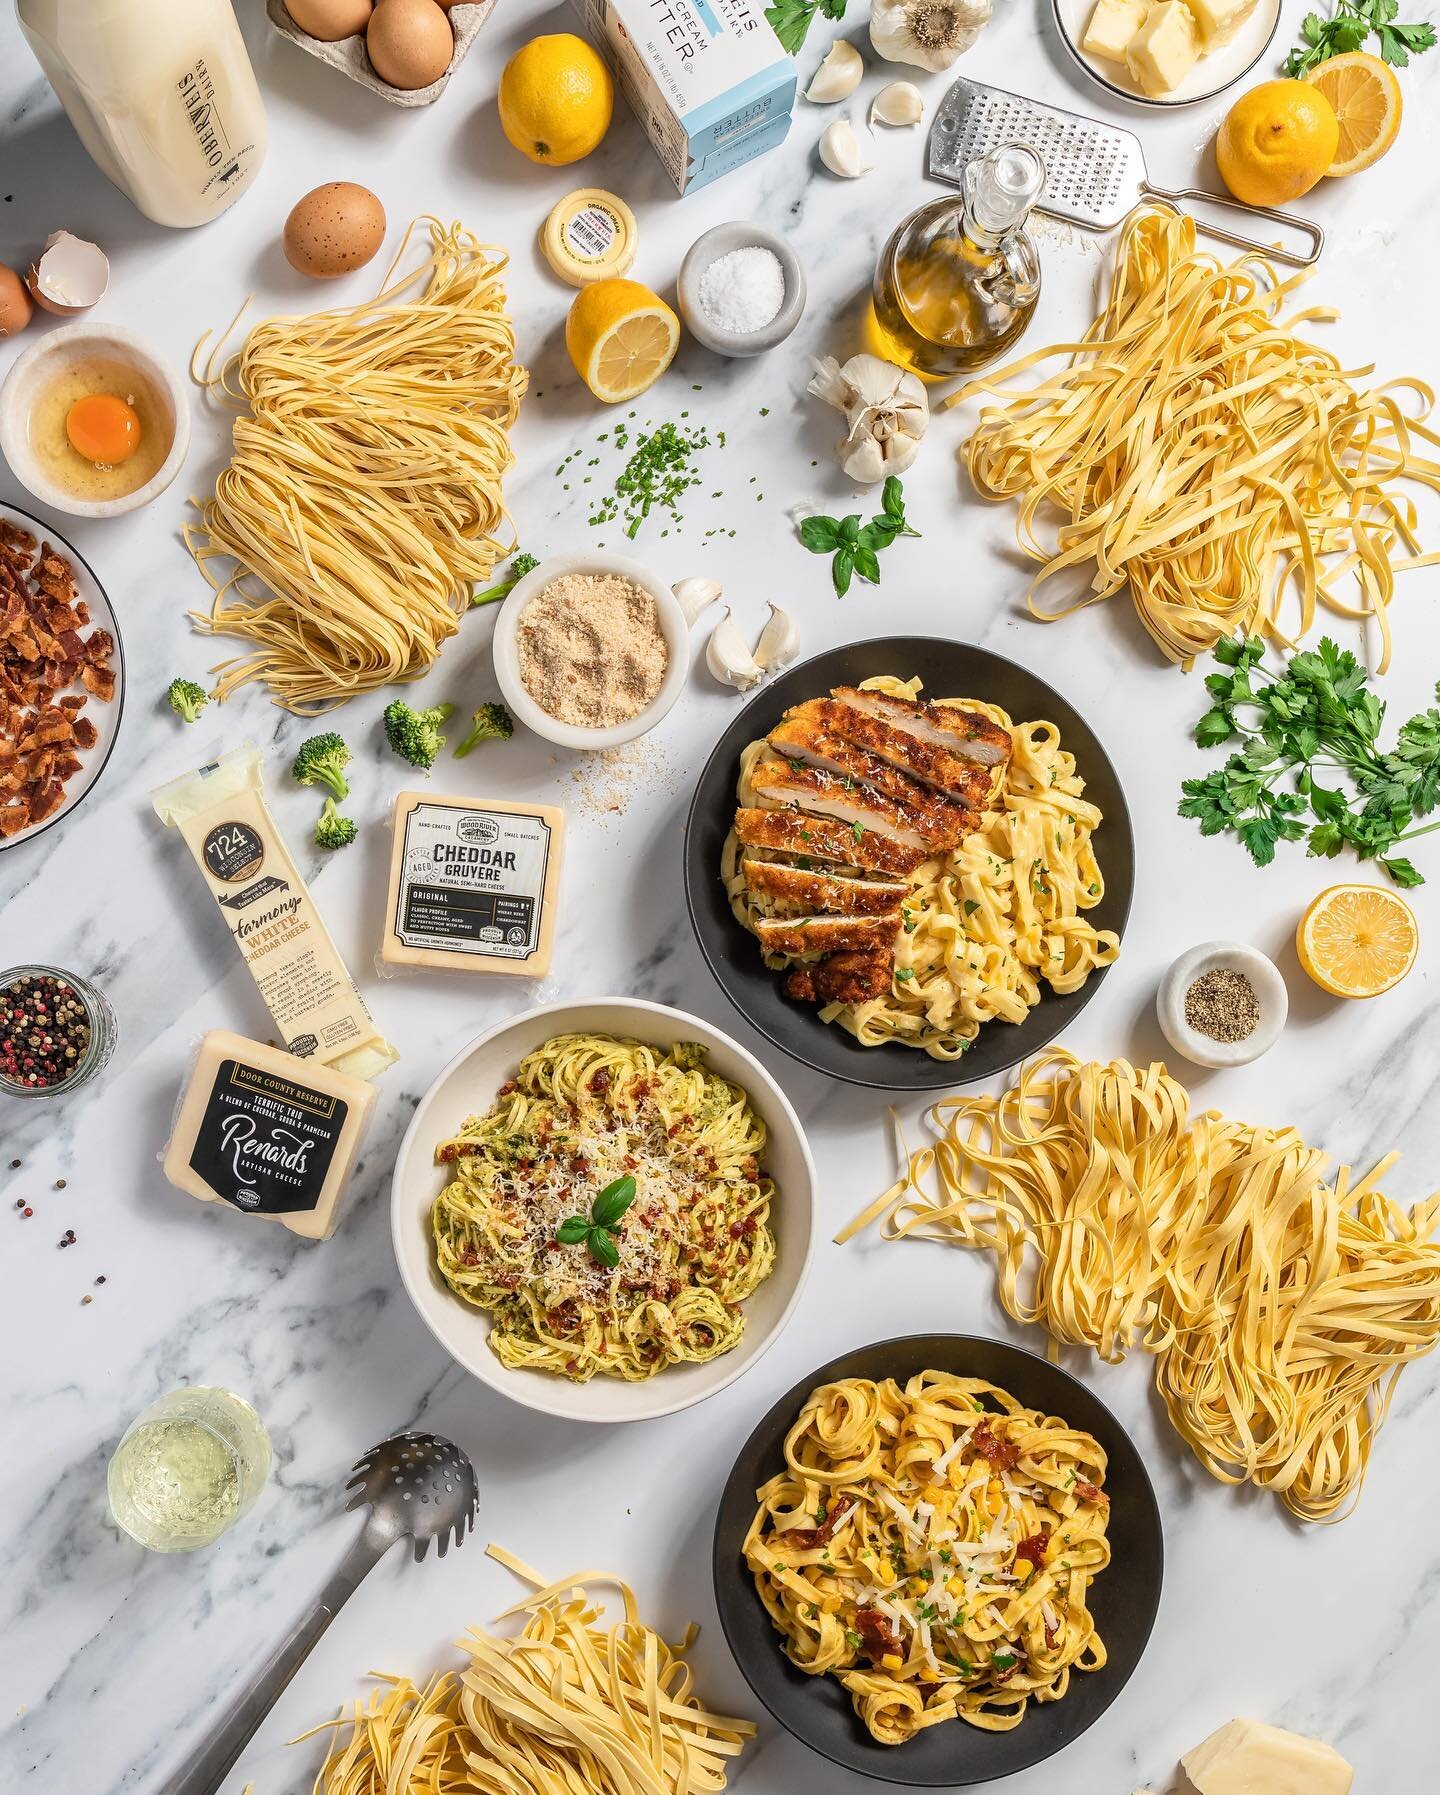 PASS THE PASTA 🍝 ⁣
⁣
Loved creating this spread for @oberweisdairy Home Delivery featuring cheddar Alfredo, broccoli pesto, and spicy corn carbonara. ⁣
⁣
My kinda Friday night feast 🙌 ⁣
Which one would be your first pick?